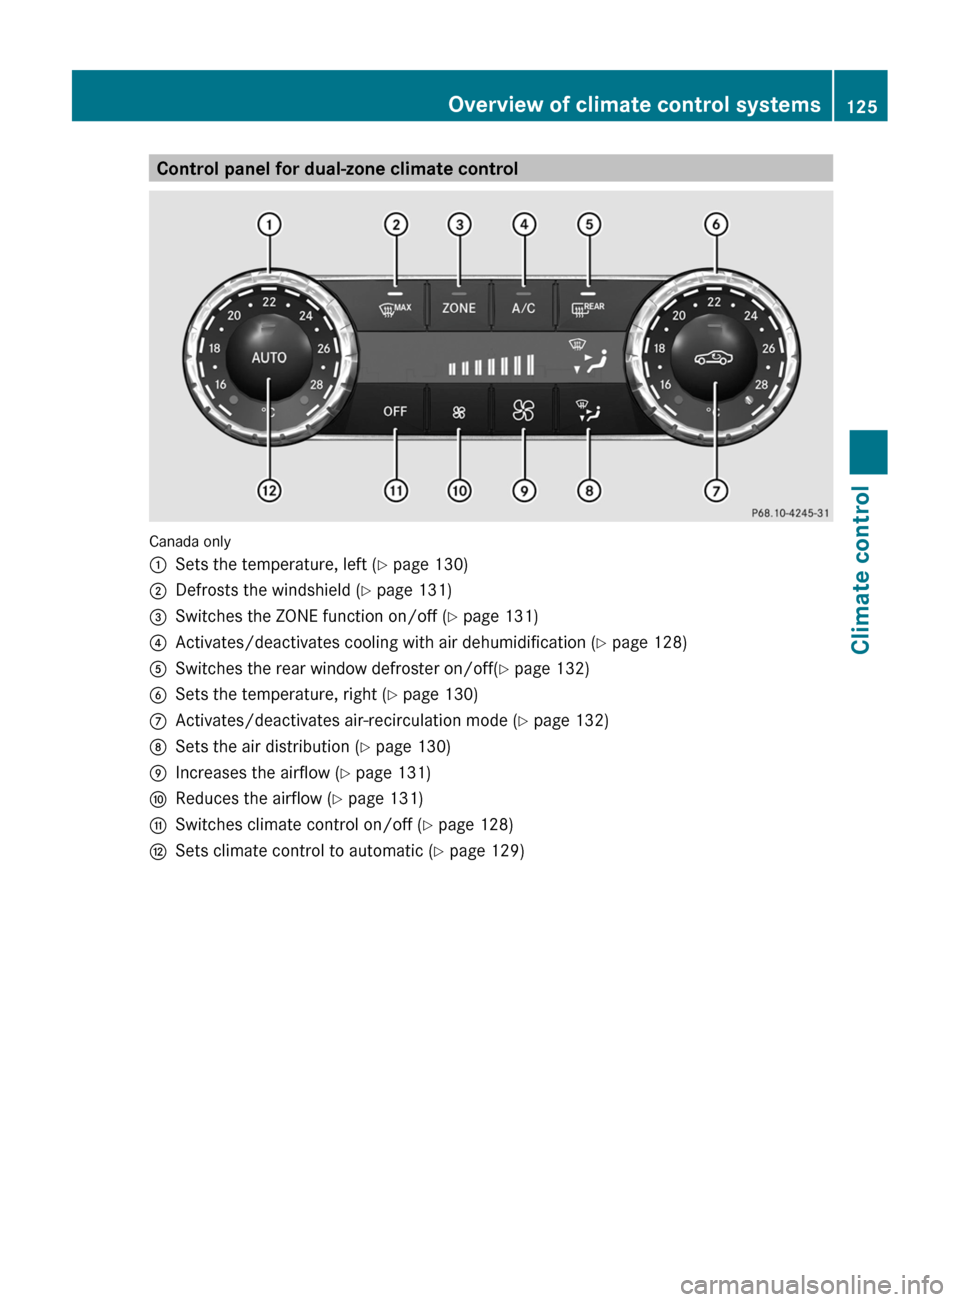 MERCEDES-BENZ CLS-Class 2013 W218 Owners Manual Control panel for dual-zone climate control
Canada only
:
Sets the temperature, left ( Y page 130)
; Defrosts the windshield ( Y page 131)
= Switches the ZONE function on/off ( Y page 131)
? Activates